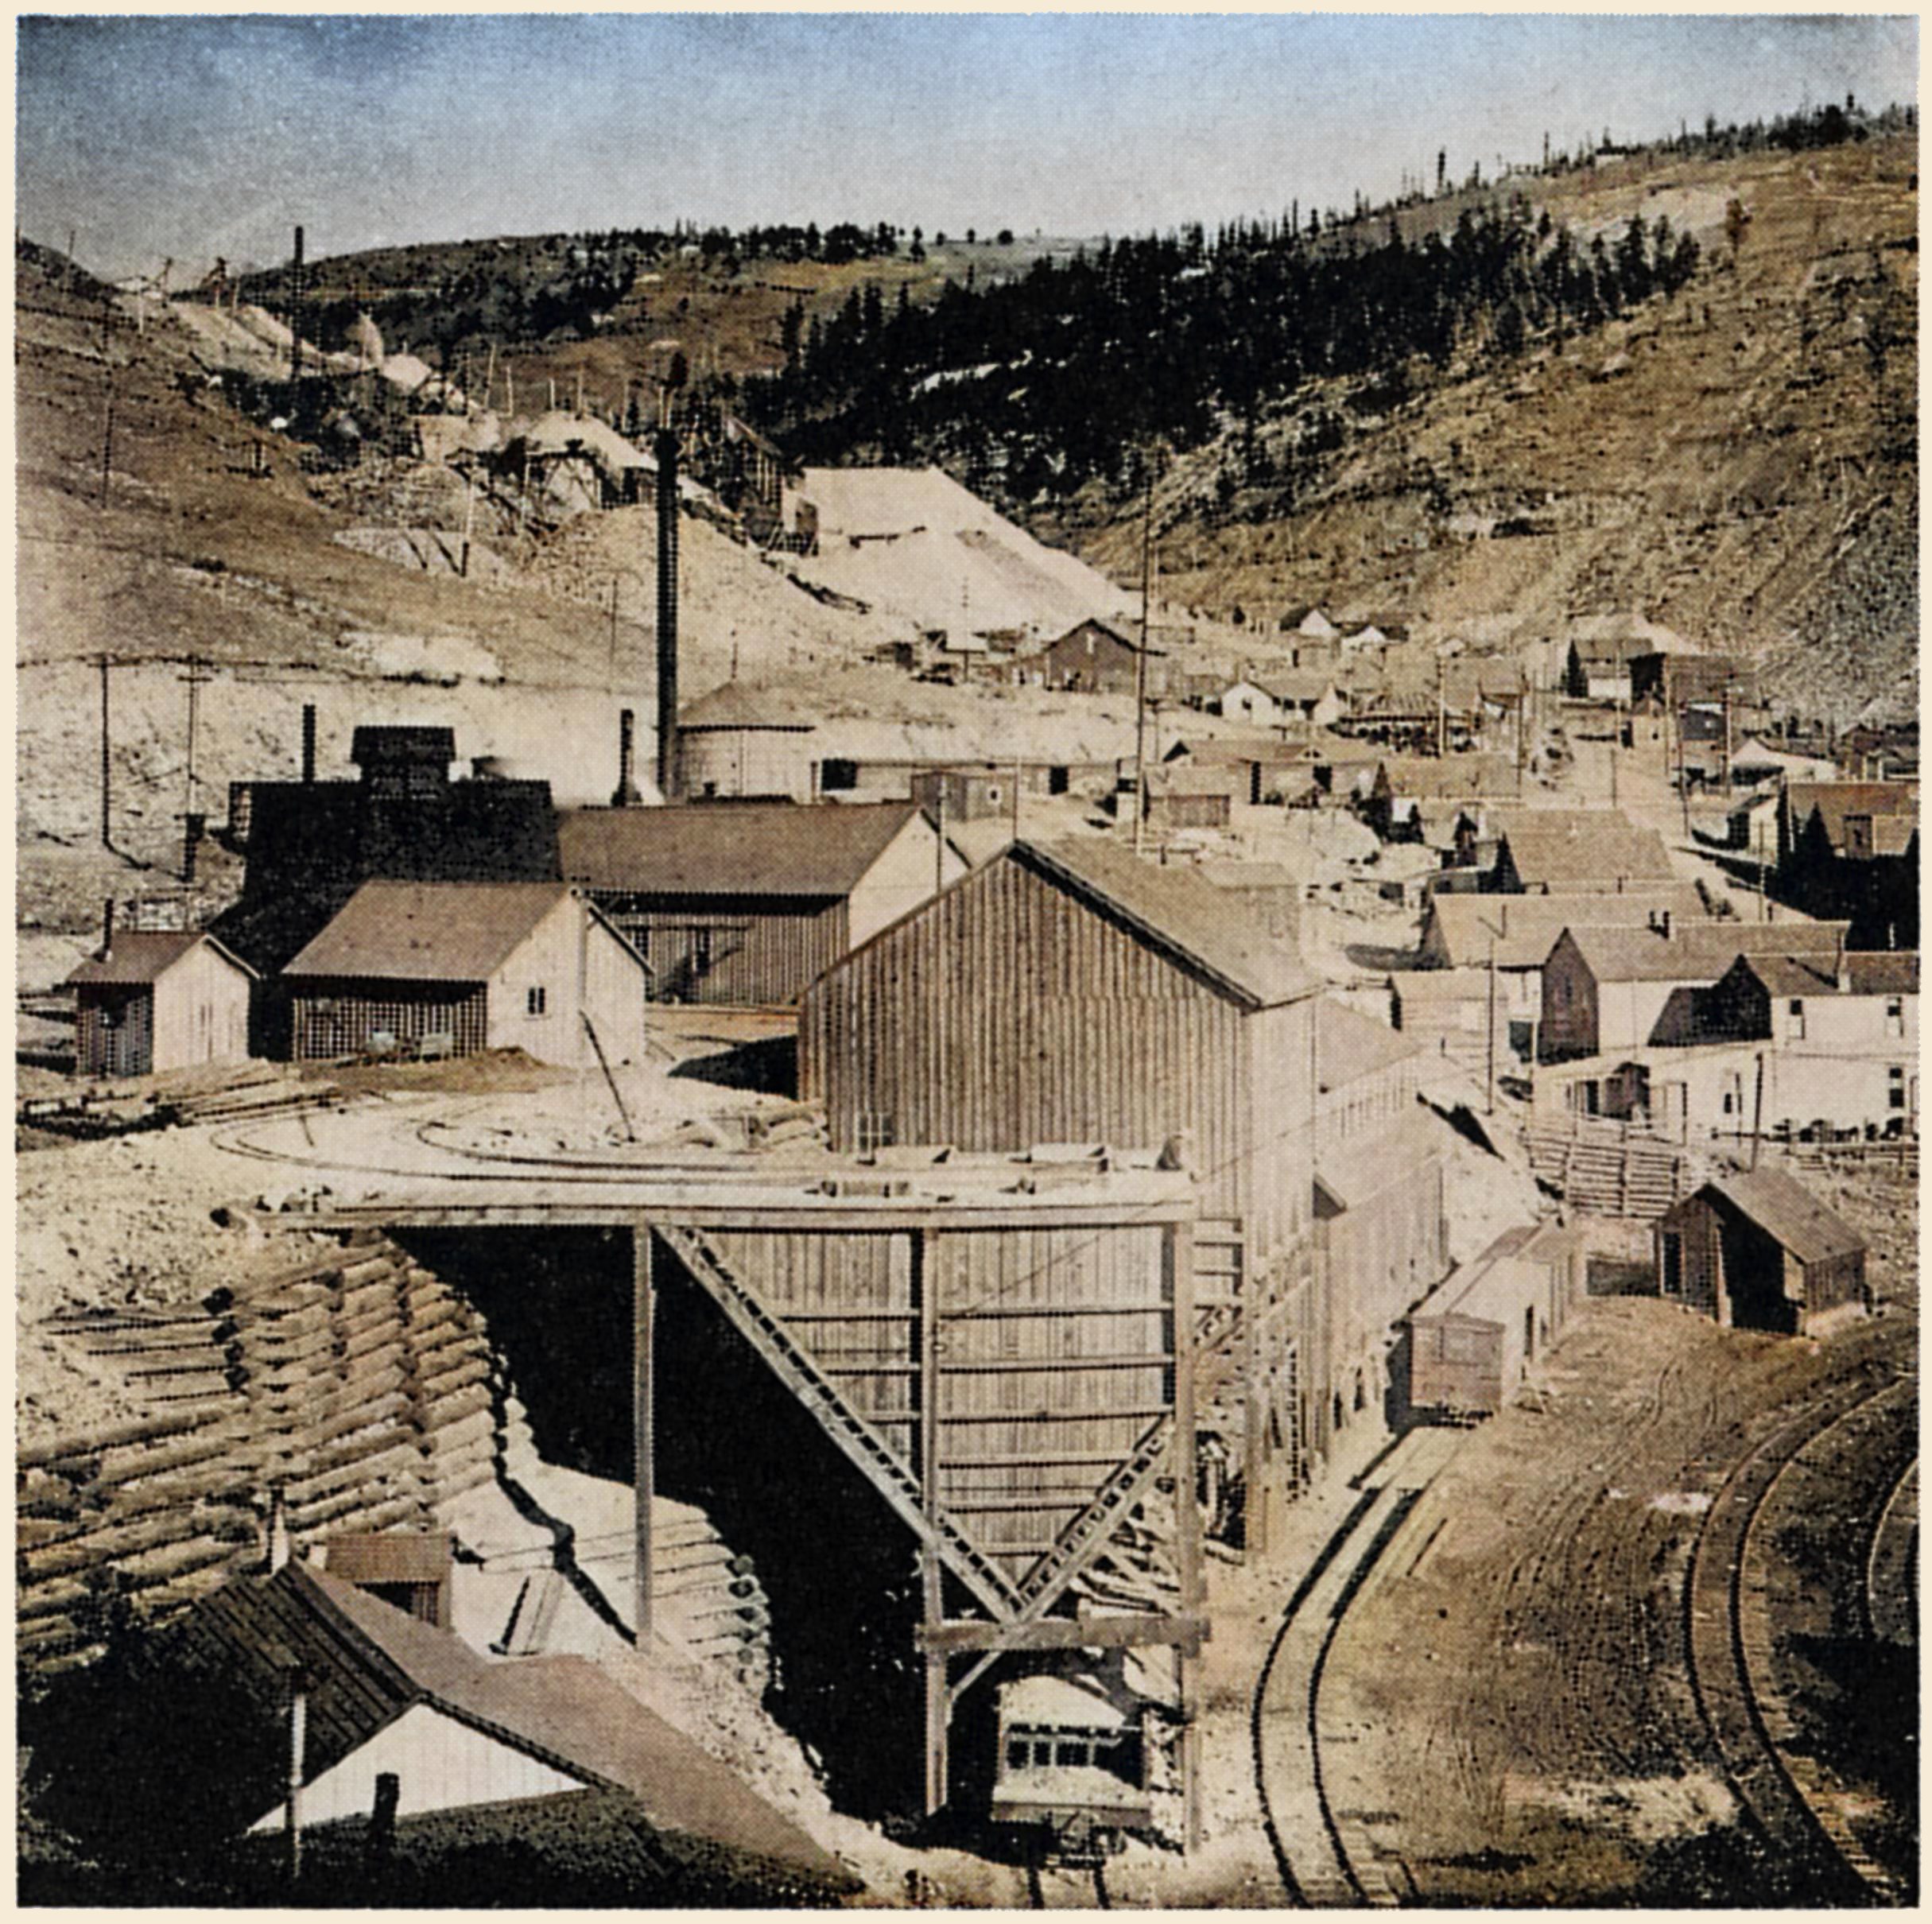 Scene at the Anaconda Mine in Squaw Gulch with an Ore Bin and an Ore House Seen in Foreground.